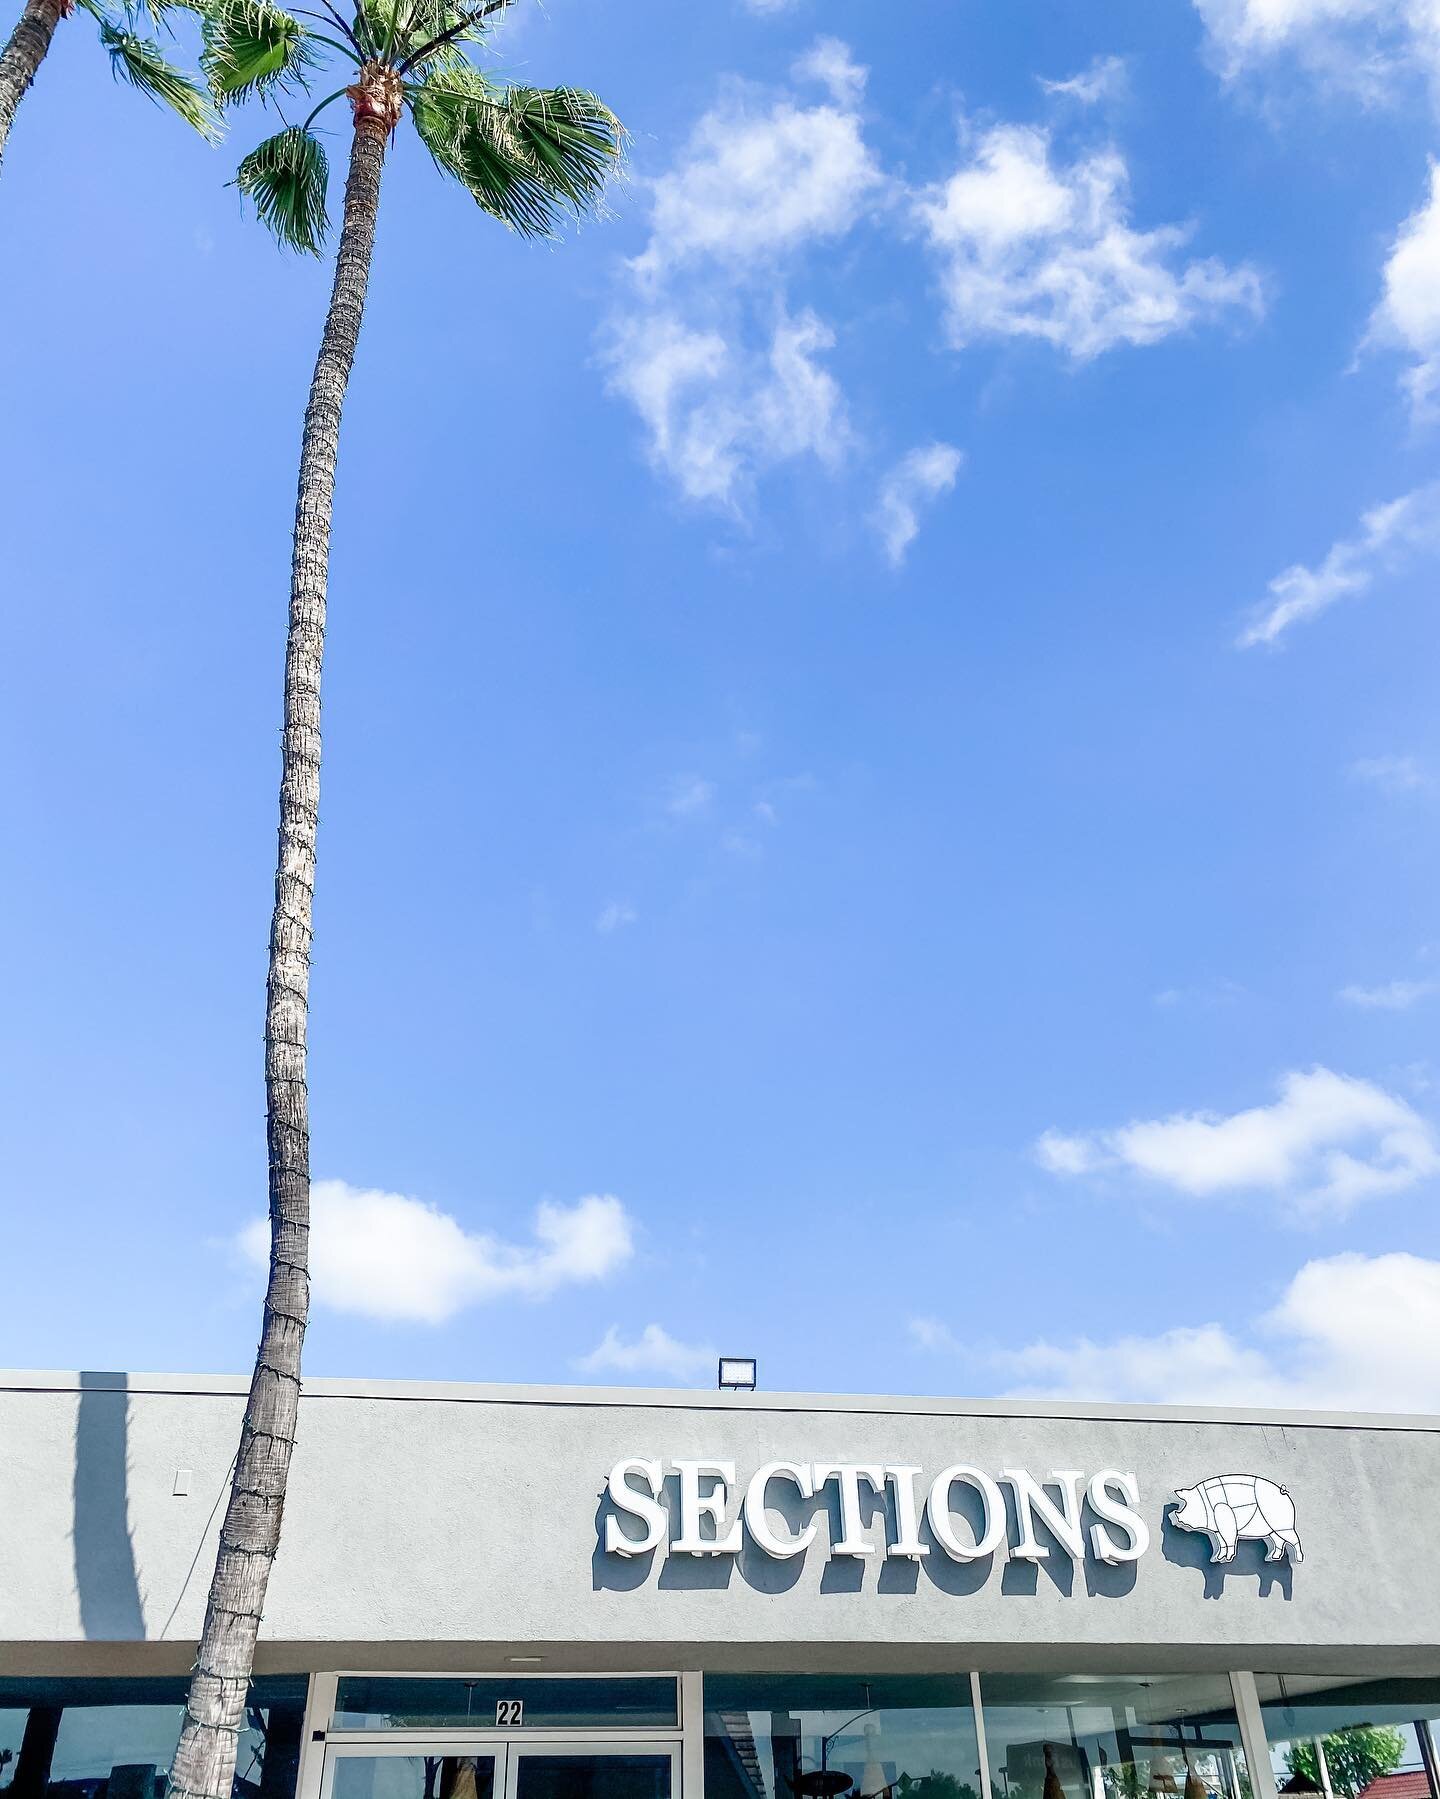 The H O L I D A Y weekend calls for the finest quality meat in town @sectionsfinemeats! ✨🥩 #333East17th #SectionsFineMeats &bull;
&bull;
&bull;
#ShopLocal #ShopSmall #CostaMesa #beach #LoveWhereyouLive #Food #cleaners #restaurants #NewportBeach #Vis